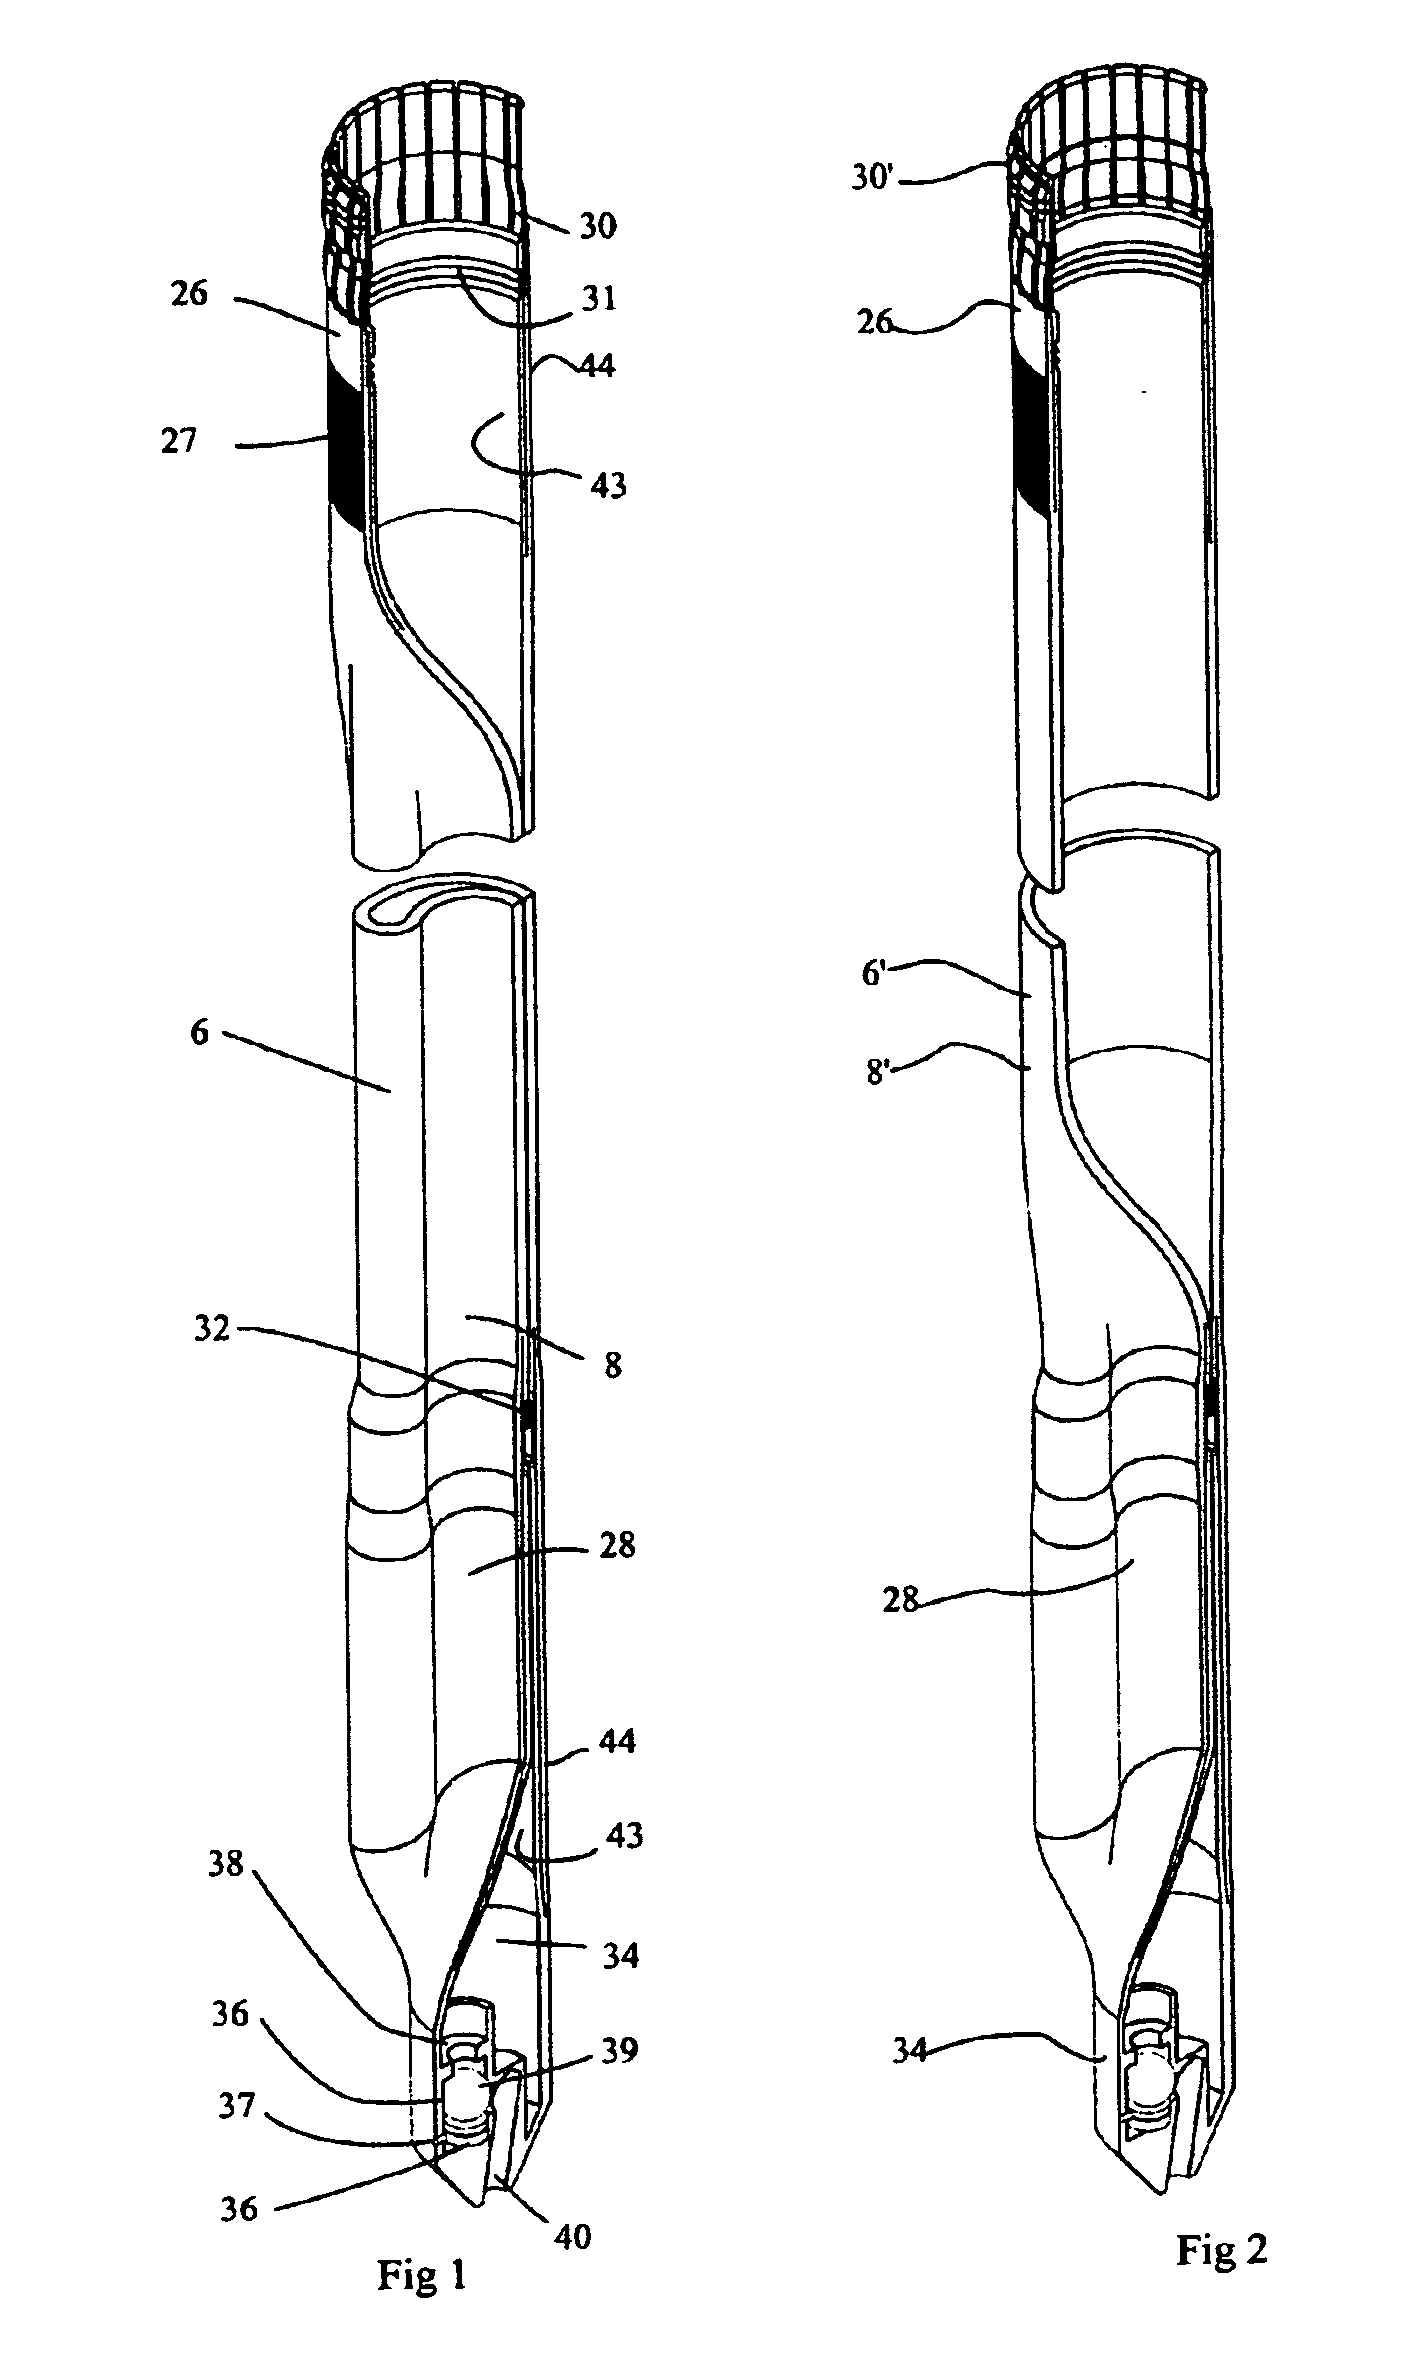 Method and system for tubing a borehole in single diameter